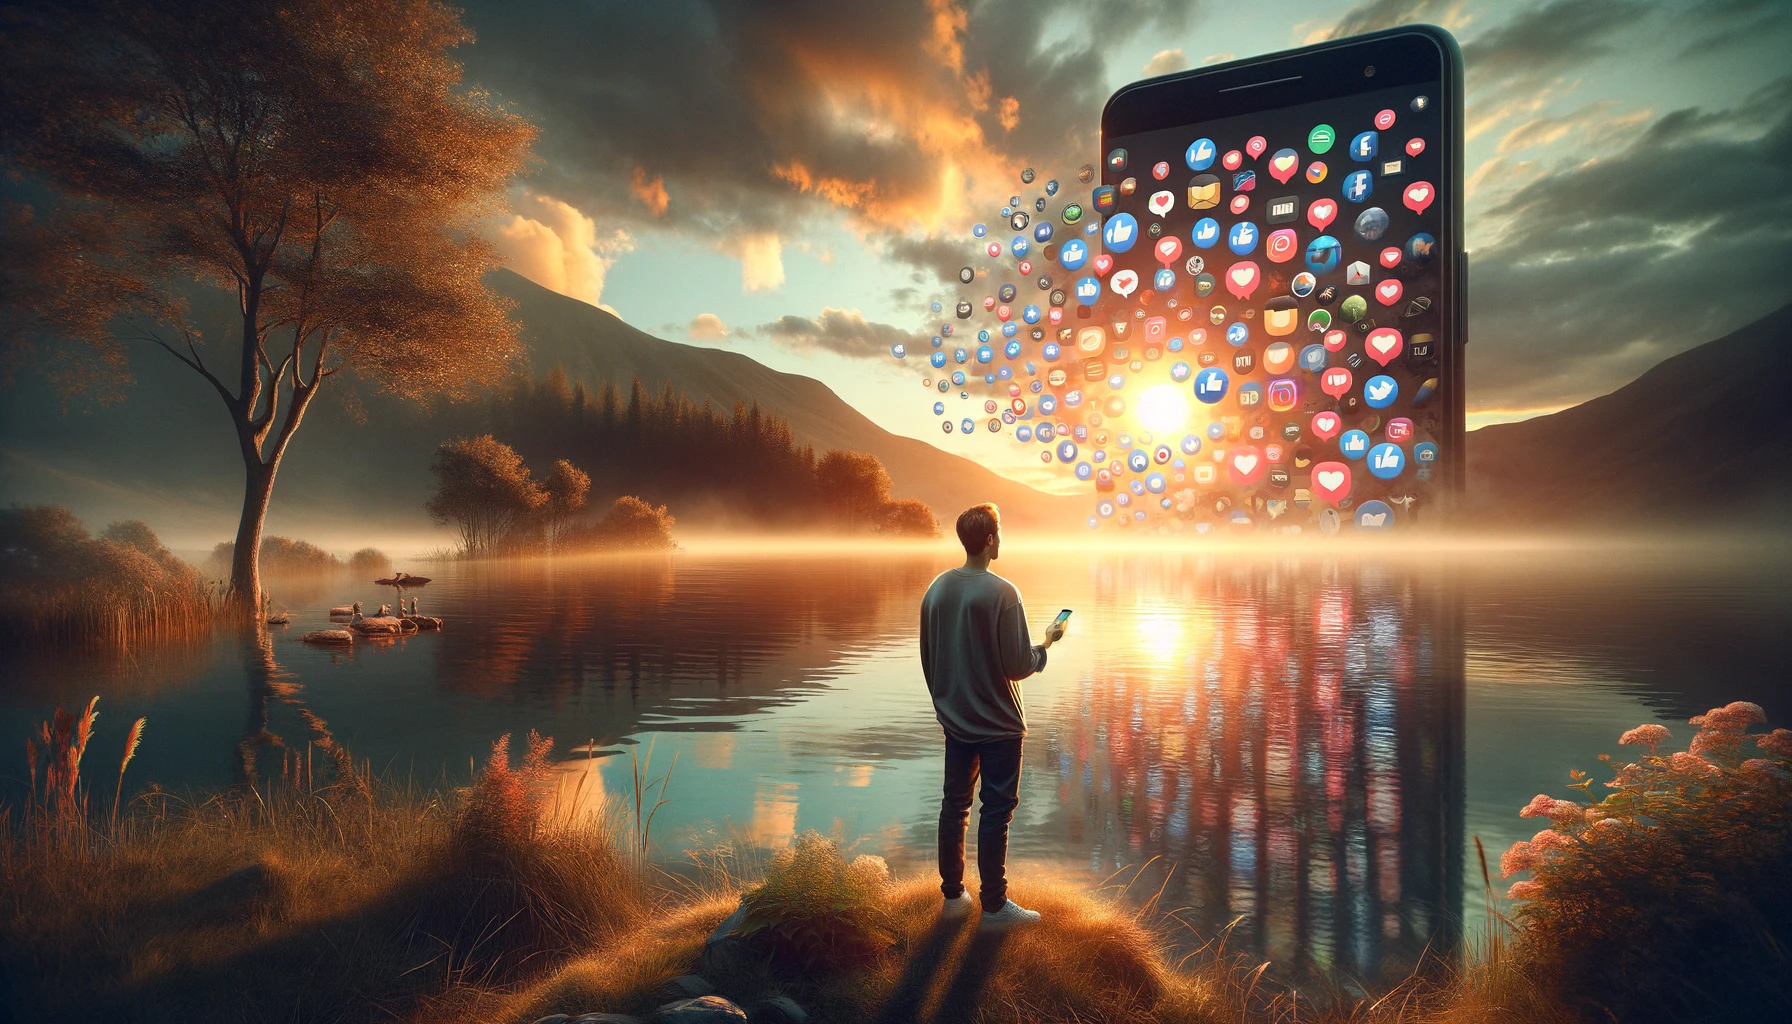 A contemplative individual at the edge of a tranquil lake, holding a smartphone with social media notifications, contrasting with the peaceful sunrise reflecting on the water, symbolizing the choice between digital engagement and embracing the natural world.